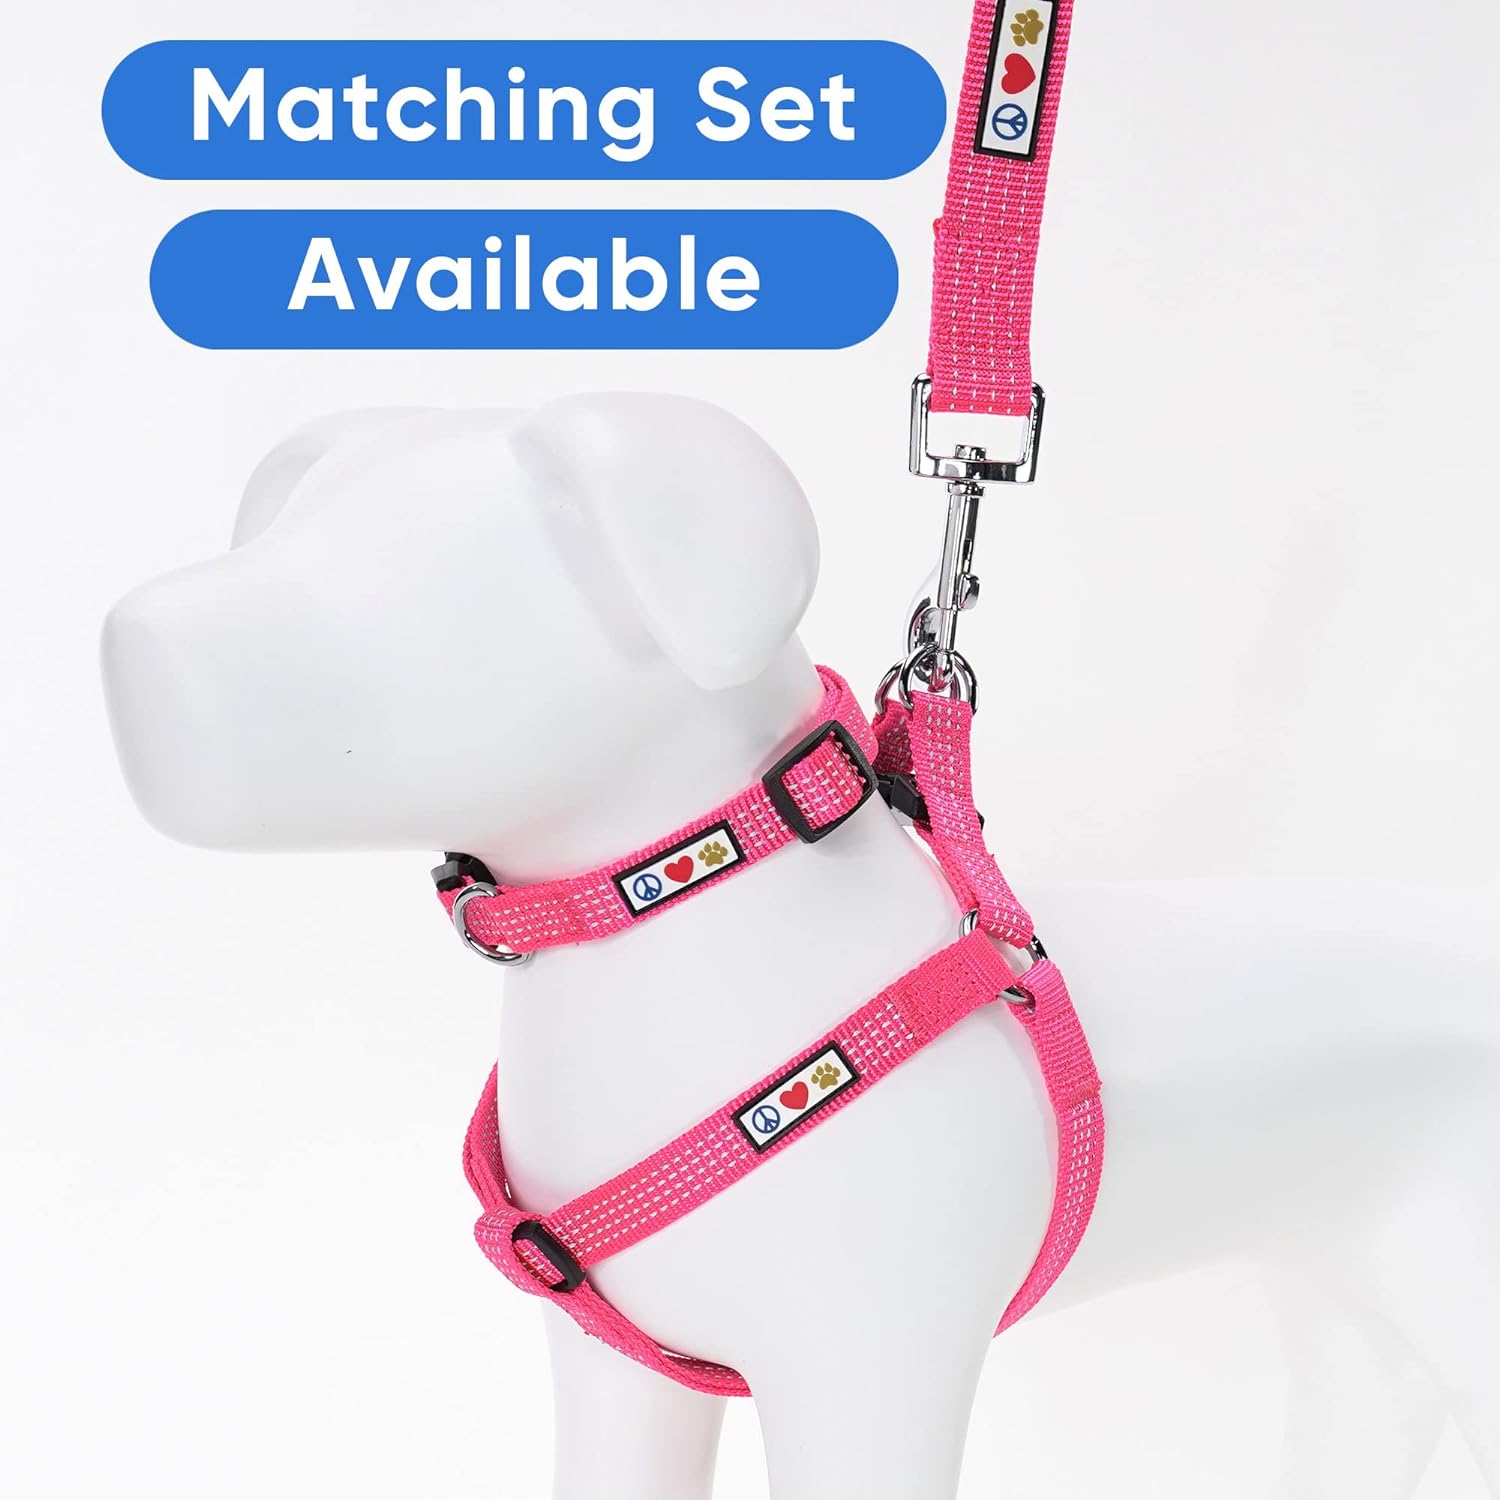 Pawtitas Dog Lead for Small Dogs Comfortable Handle Training Dog Lead 1.8m Long Dog Lead Puppy Lead - Reflective Lead Pink Dog Lead for Small Breeds :Pet Supplies